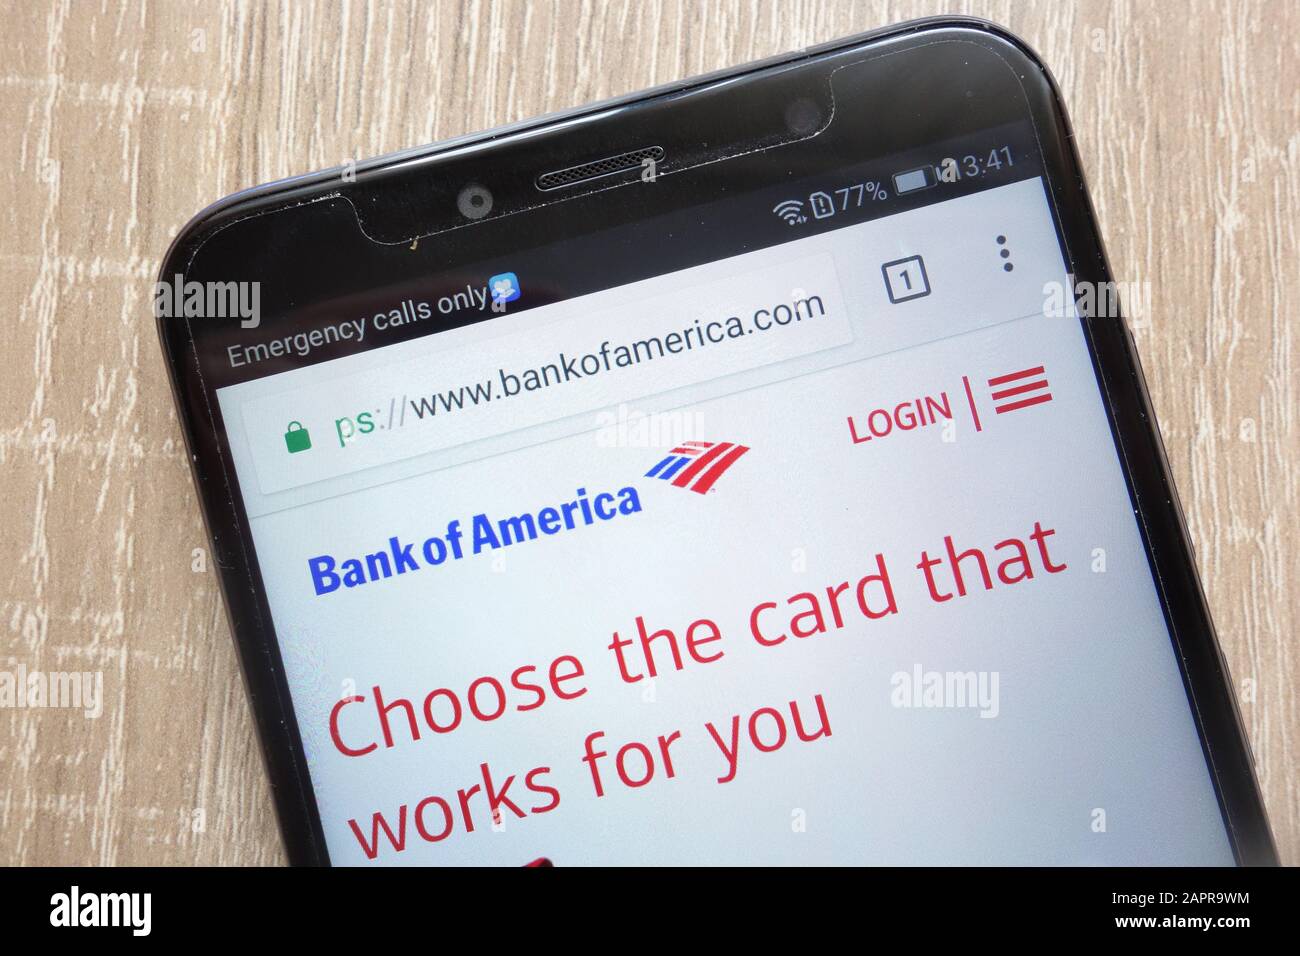 Bank of America Corp. website displayed on a modern smartphone Stock Photo